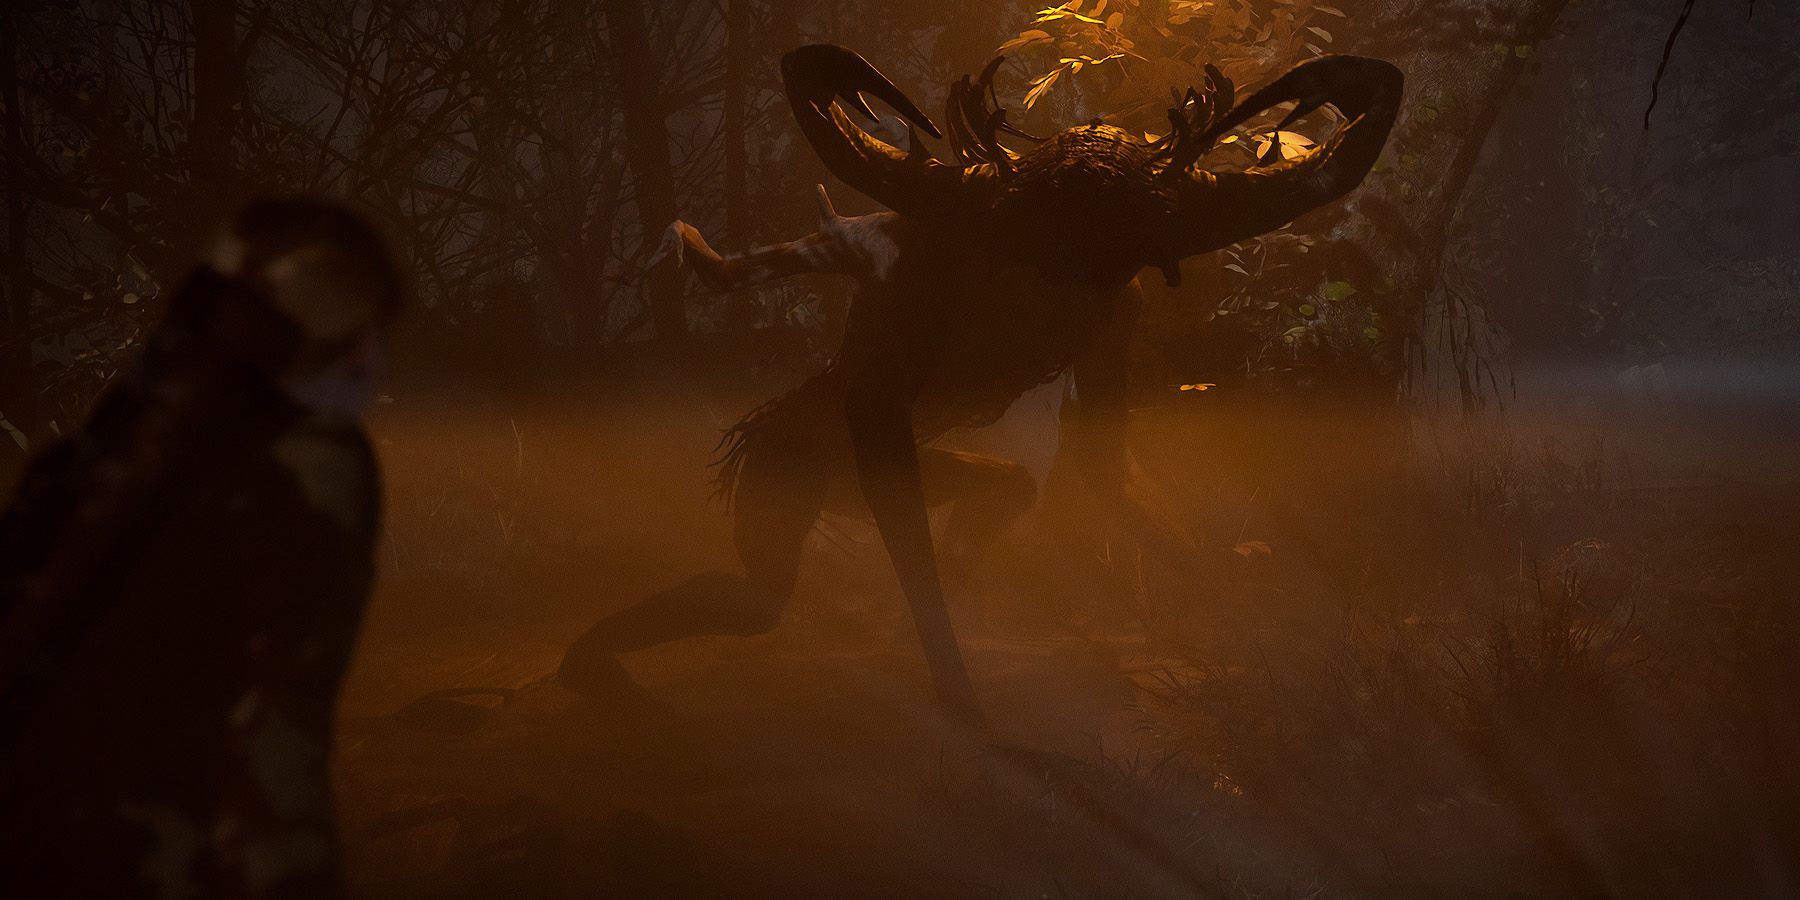 alone-in-the-dark-cinematic-still-game-rant-advance-creature-emily-horned-large-beast-outdoors-forest